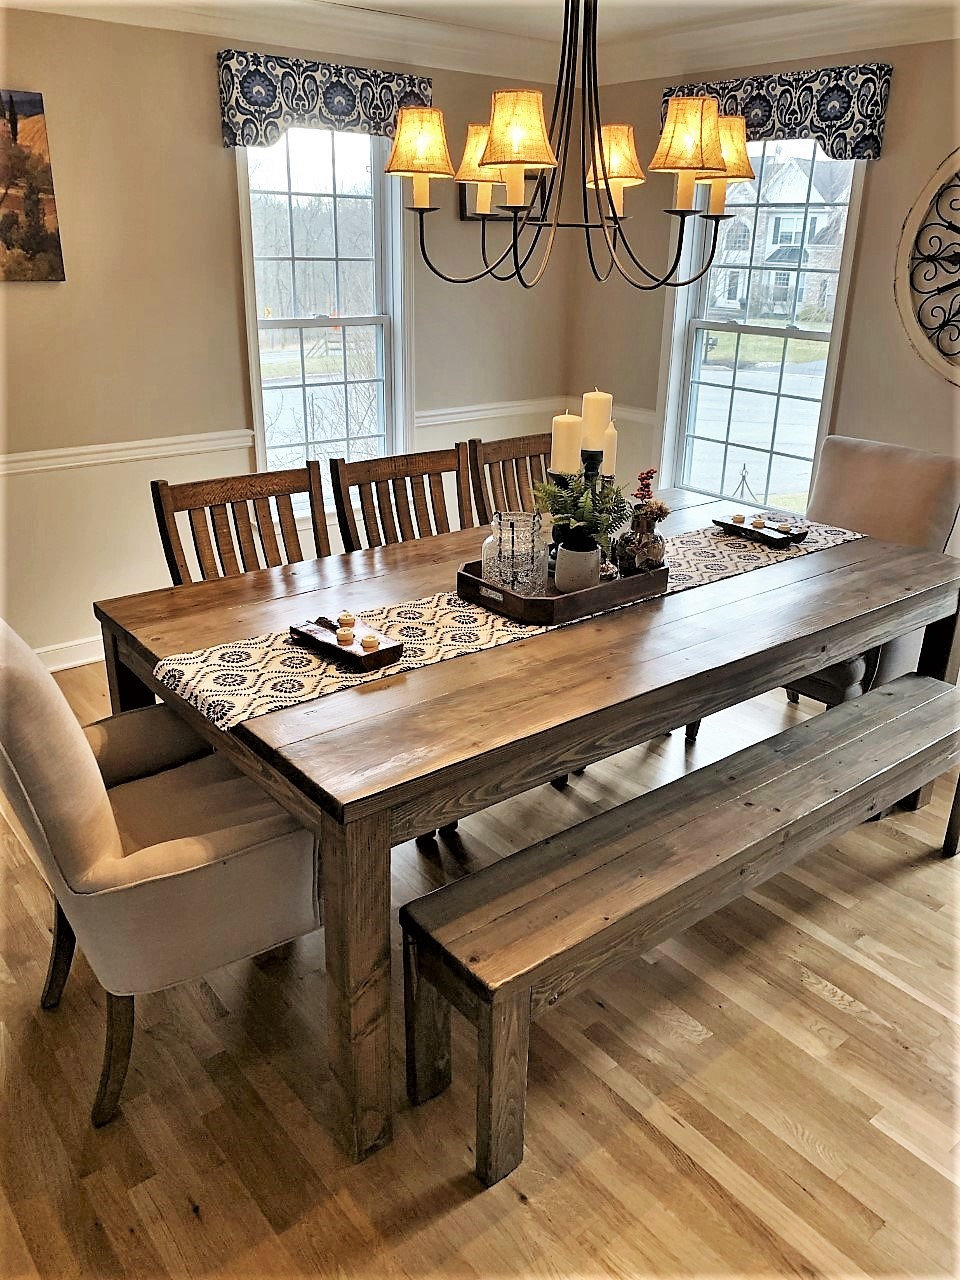 Rustic Farmhouse Dining Table, Farm Dining Room Table And Chairs